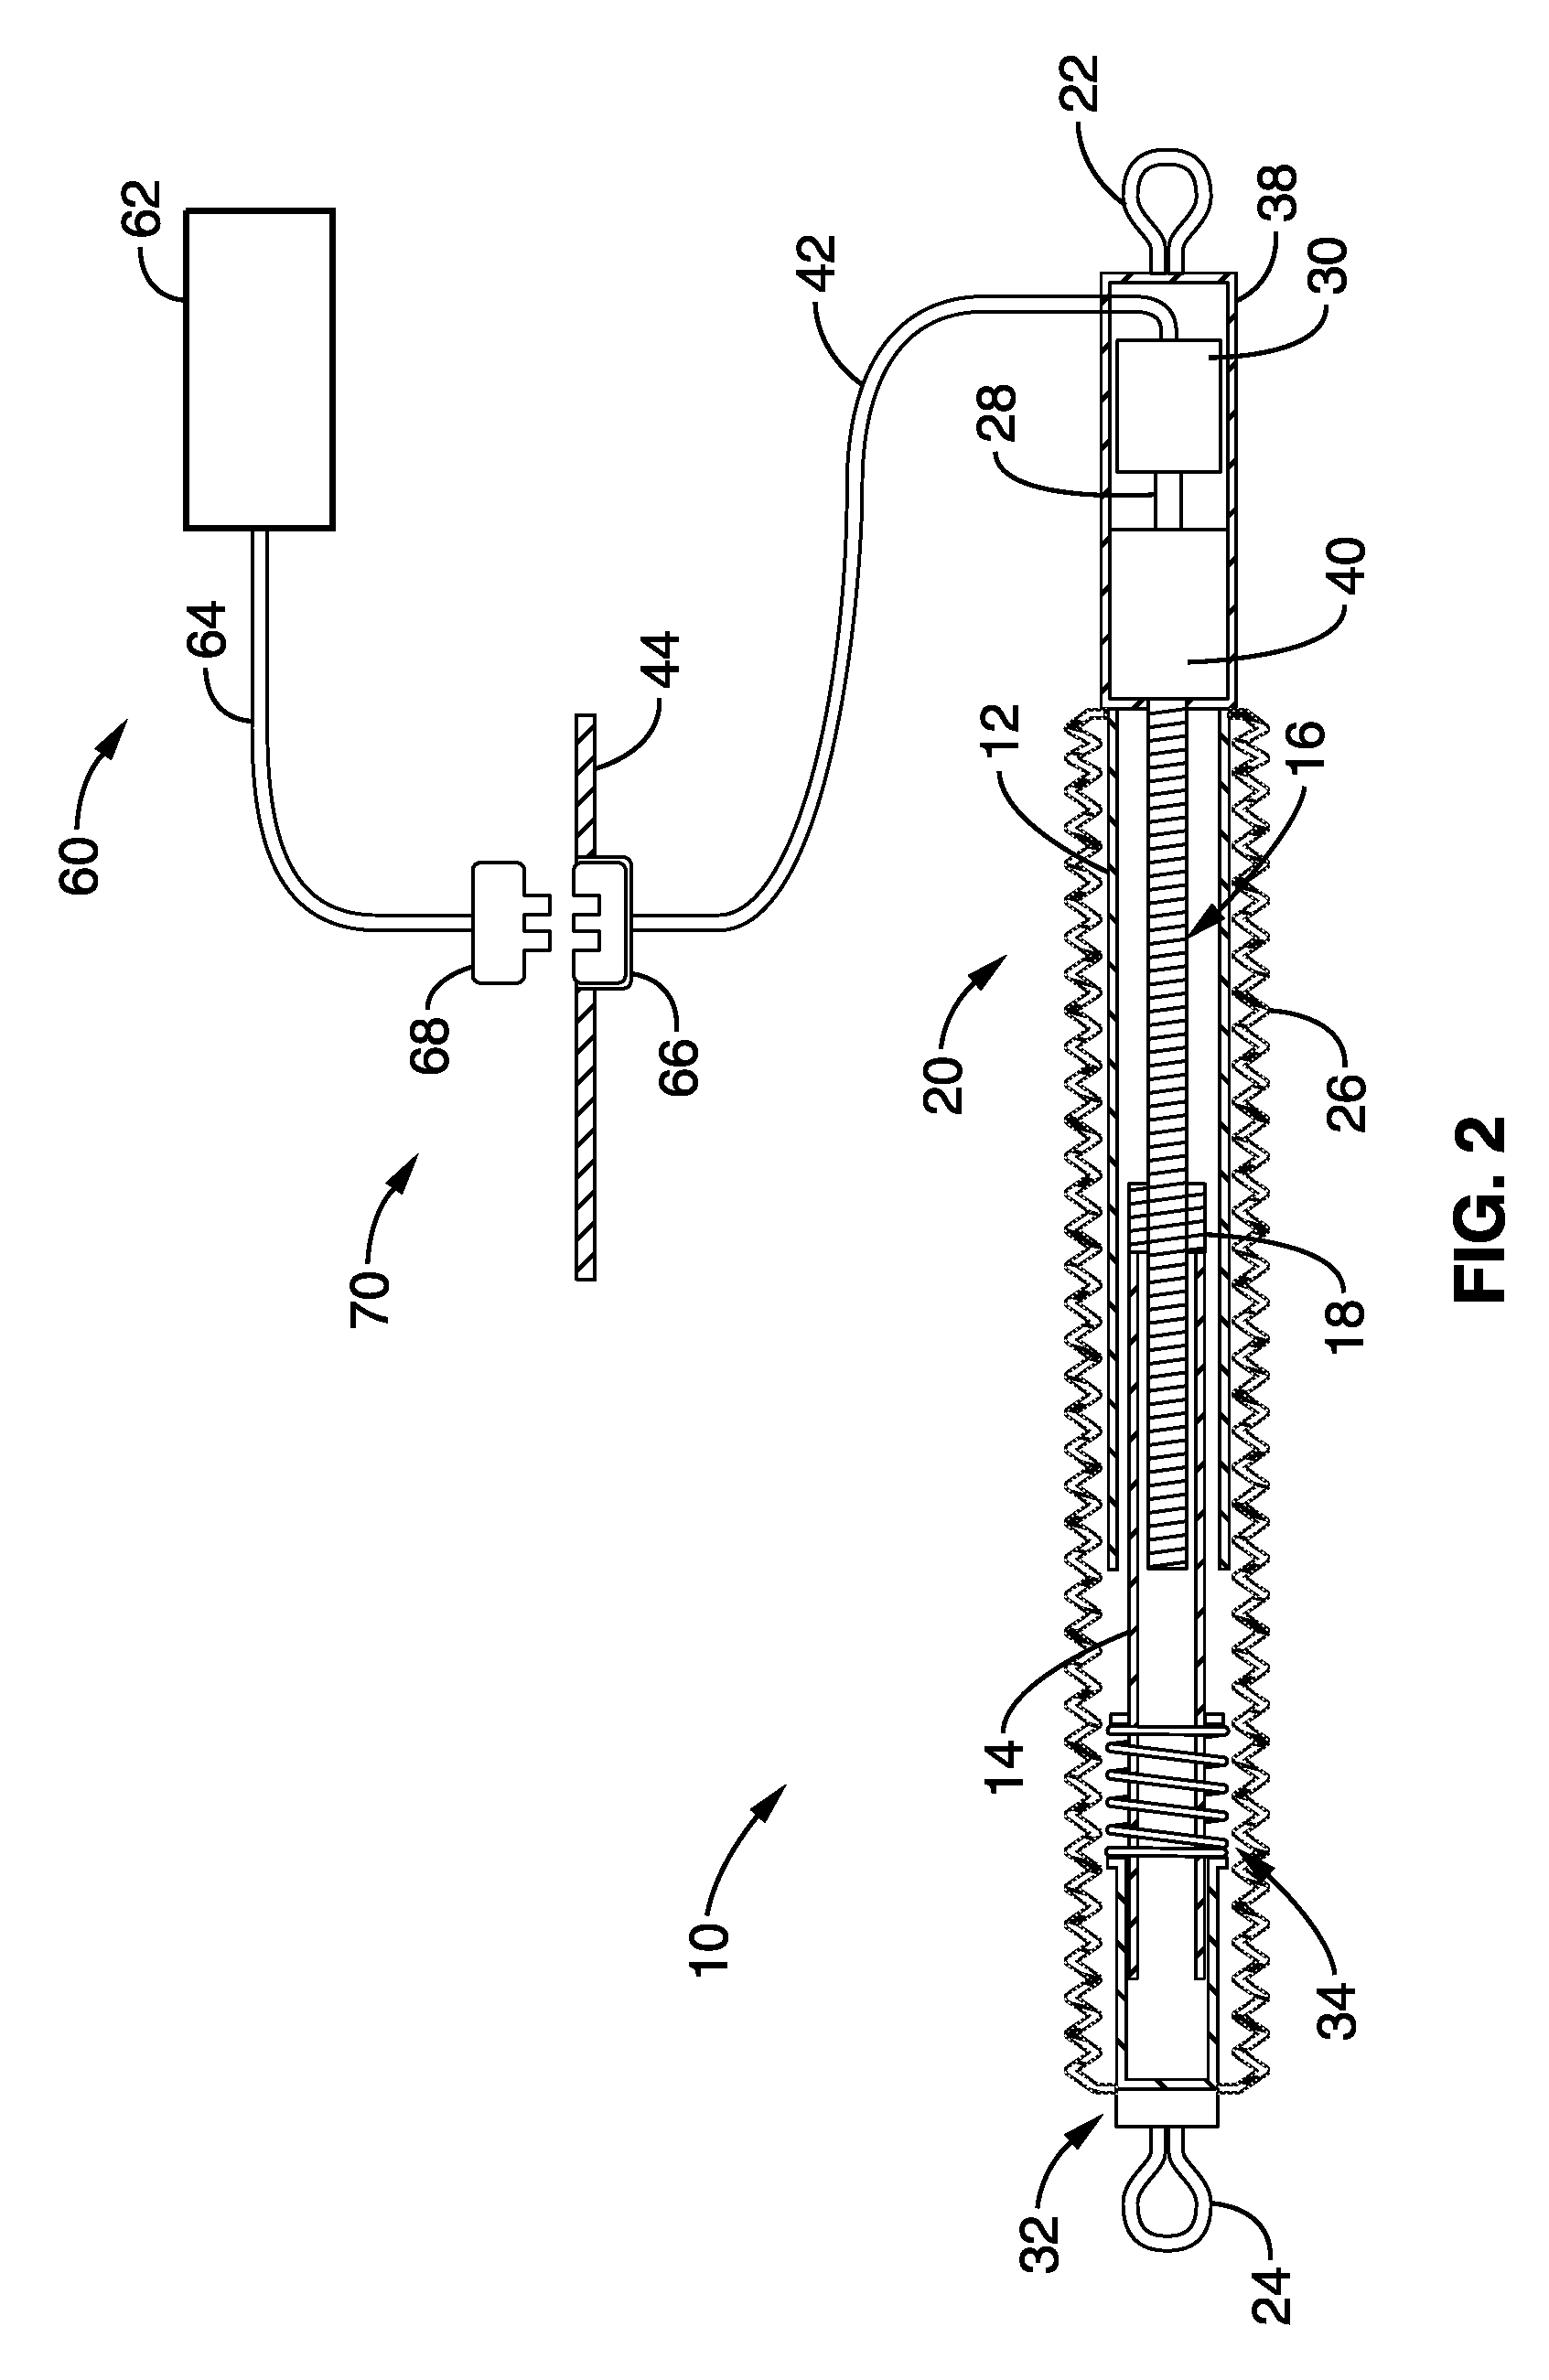 Apparatus and methods for alteration of anatomical features